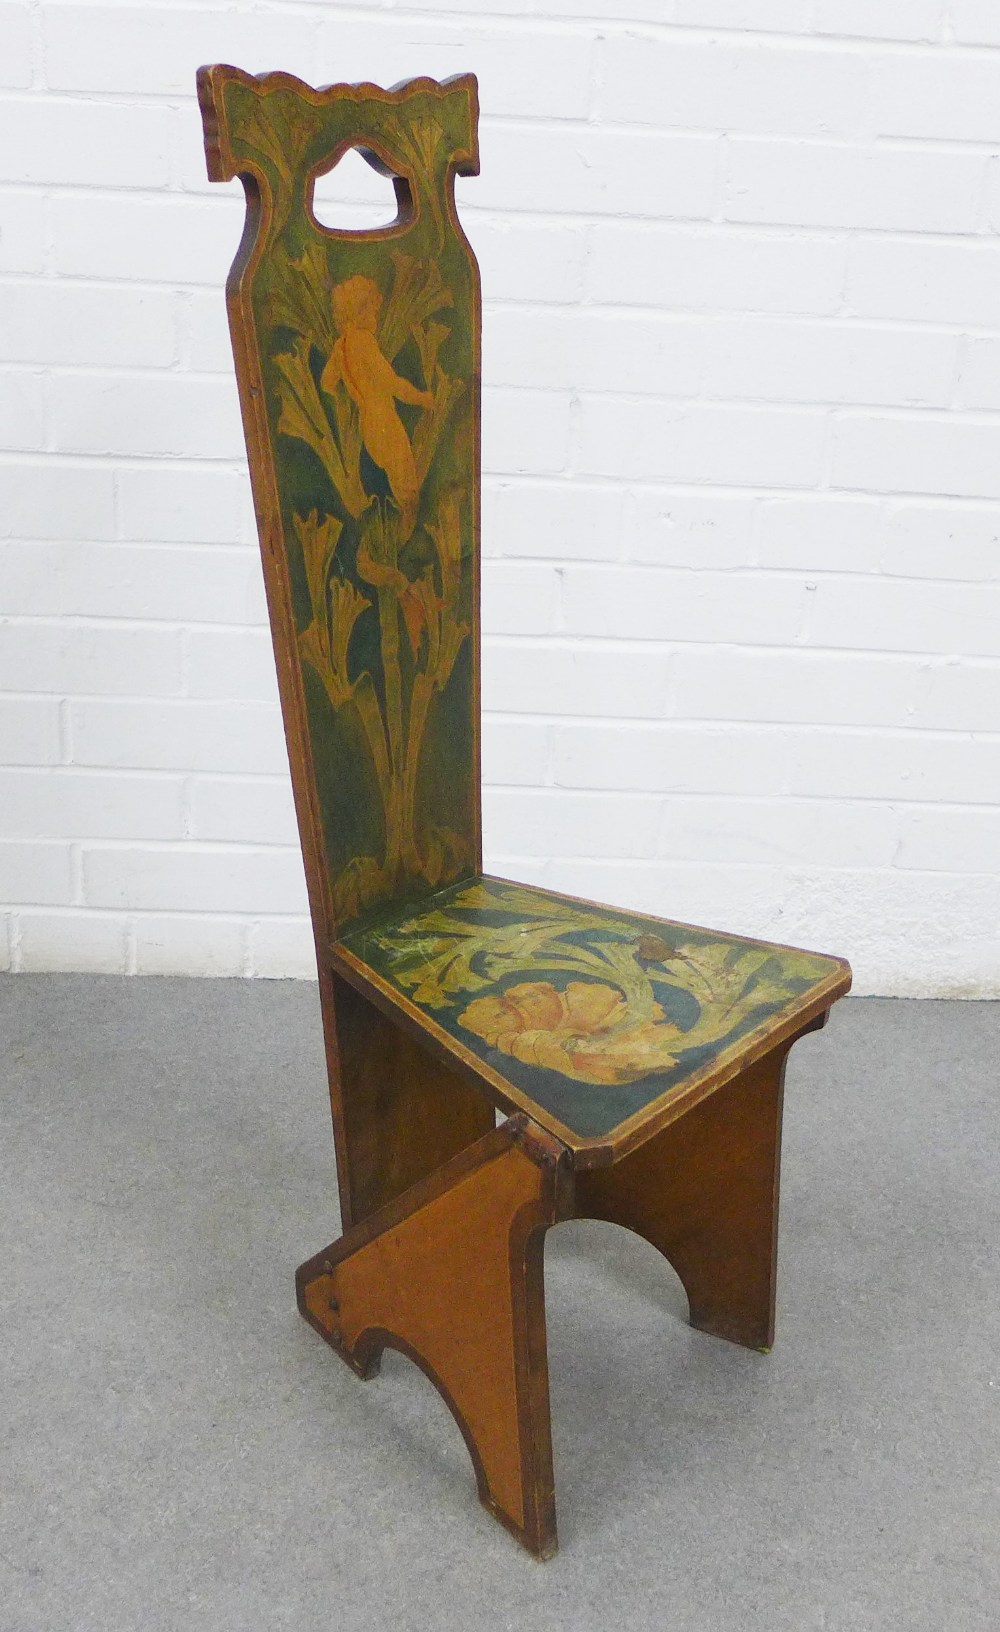 Glasgow style penwork Mermaid pattern chair, with sloped back and shaped supports, 86 x 31cm